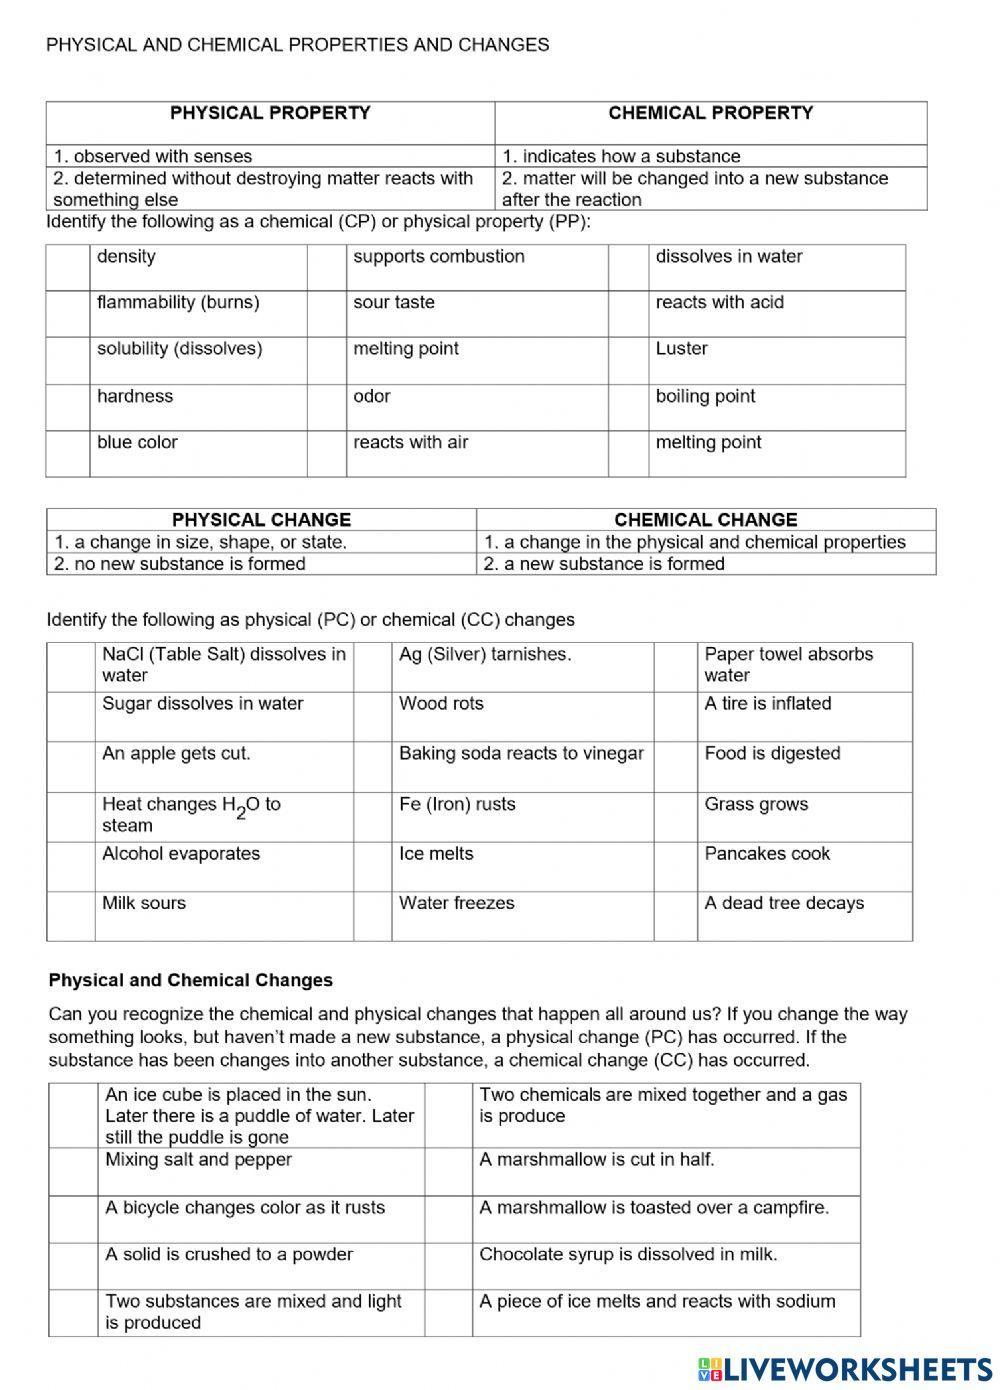 PS-01-08-Physical and Chemical Properties and Changes